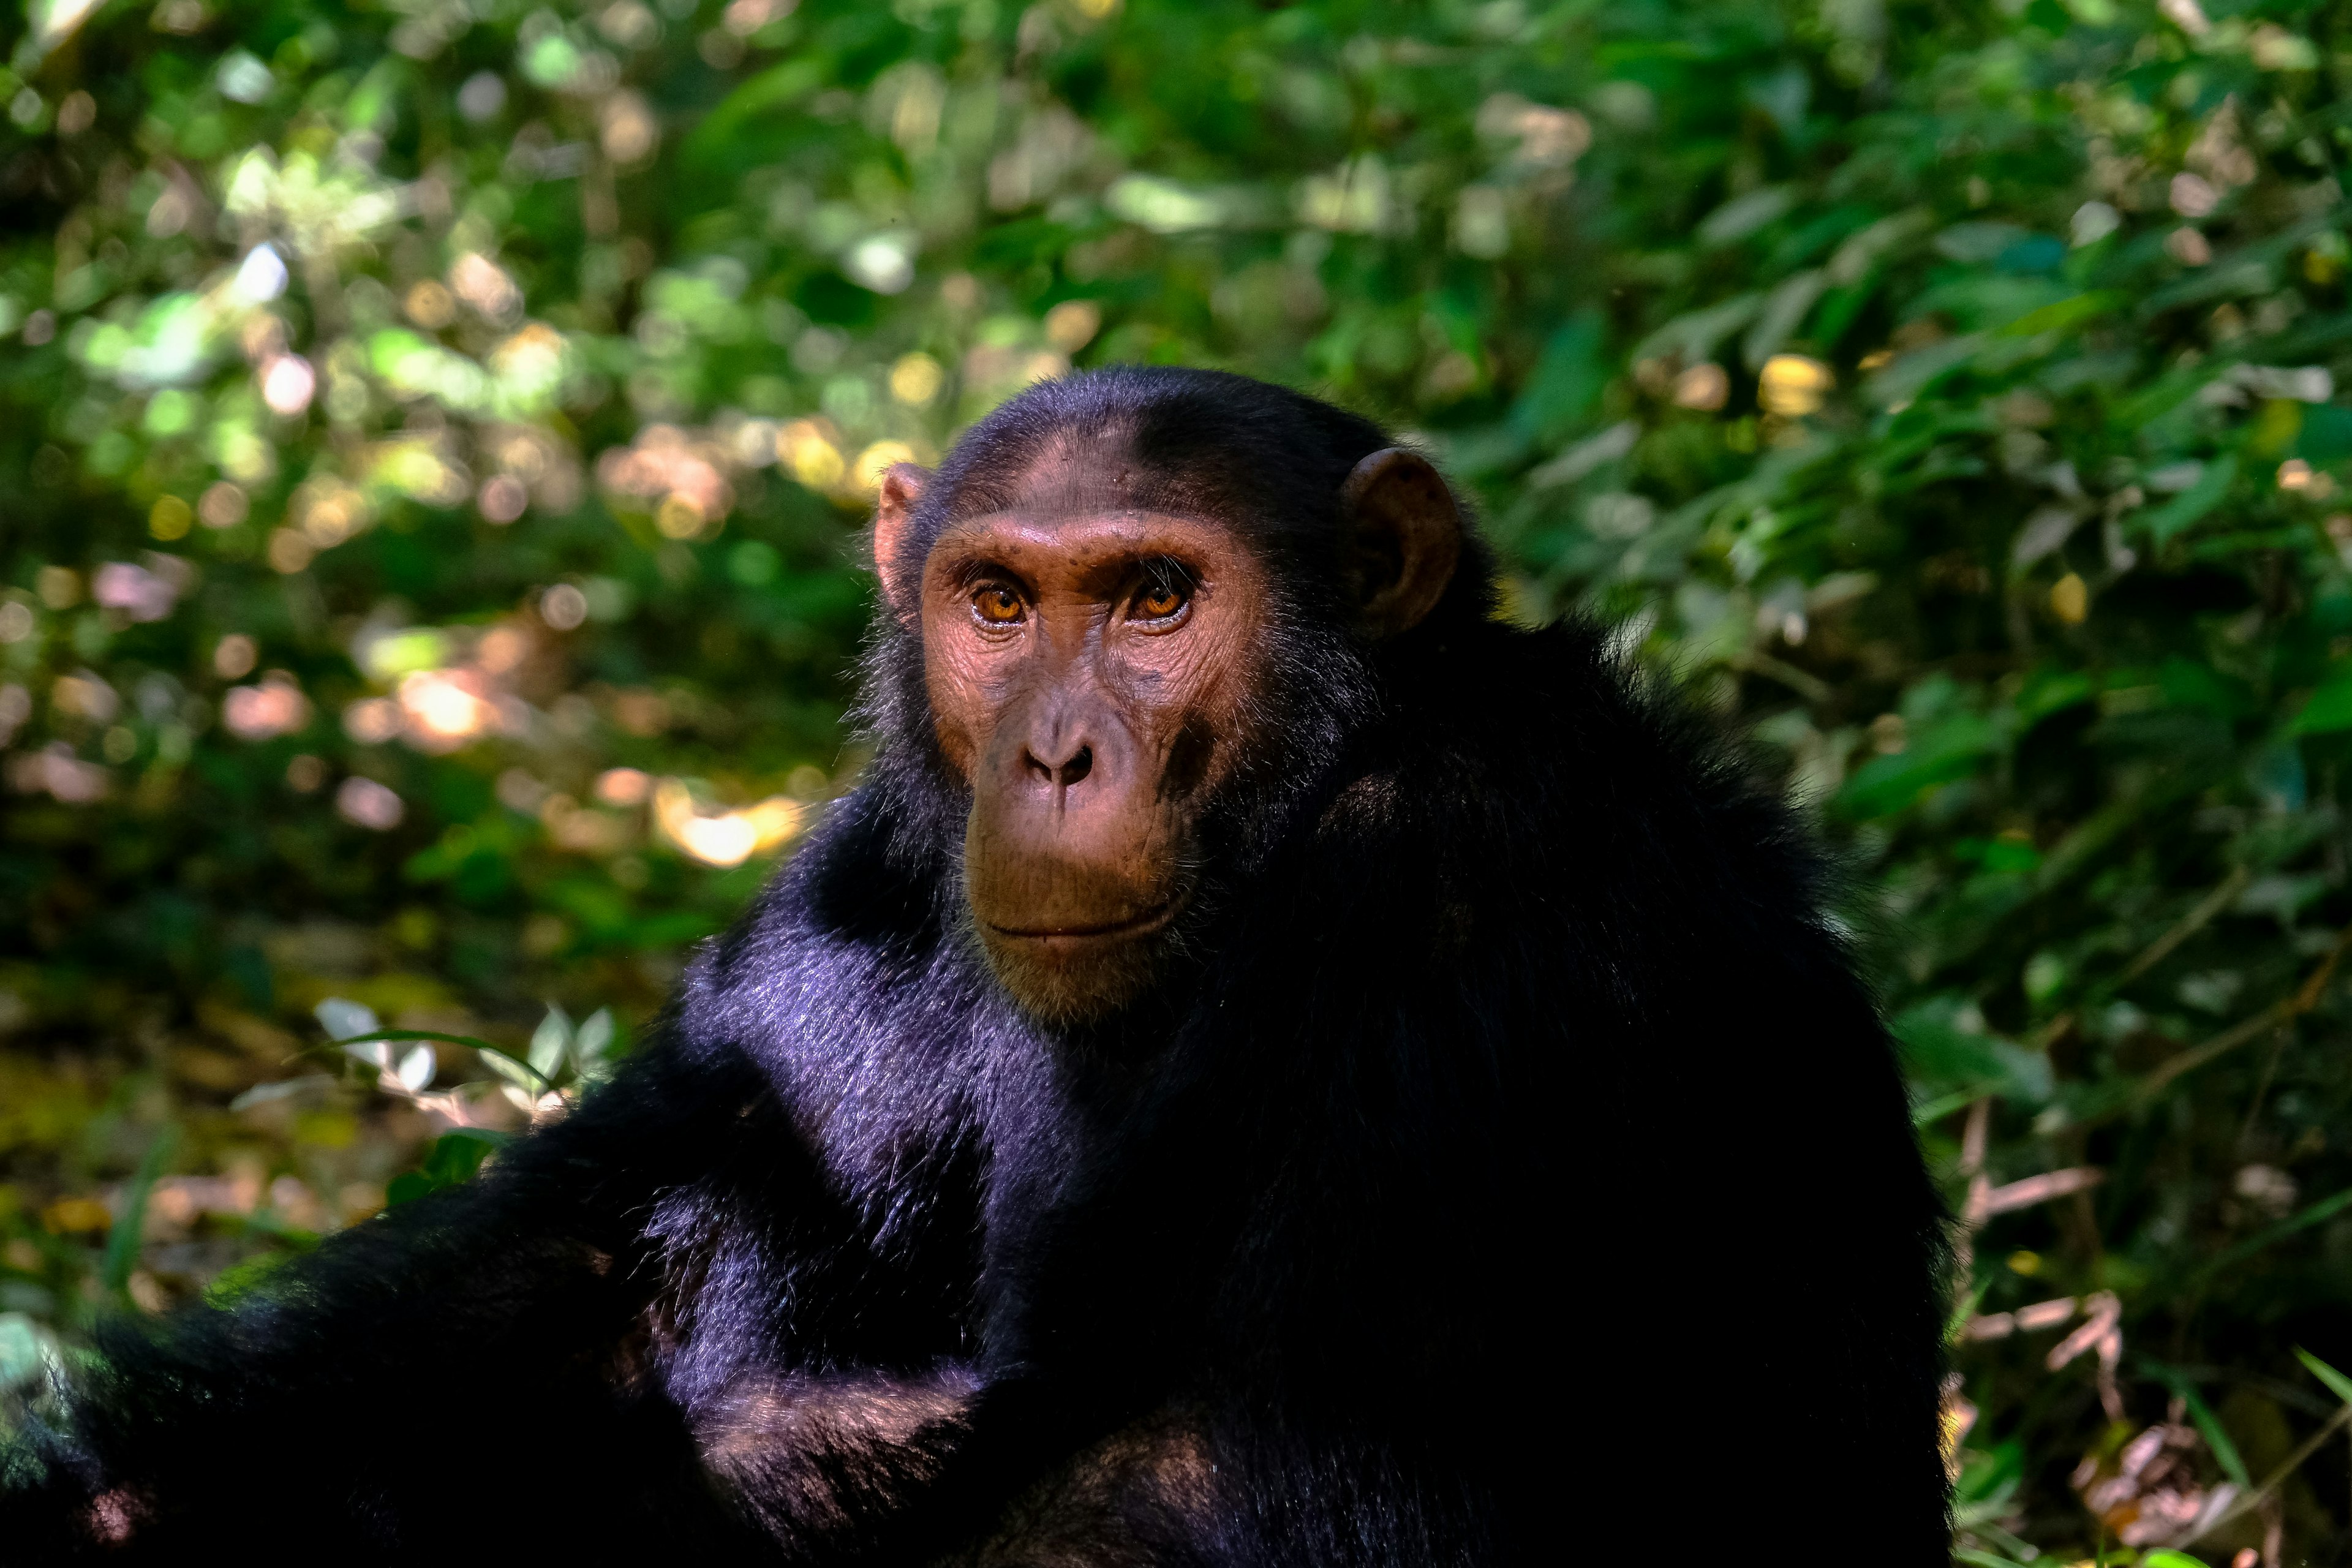 chimpanzee sitting in the forest